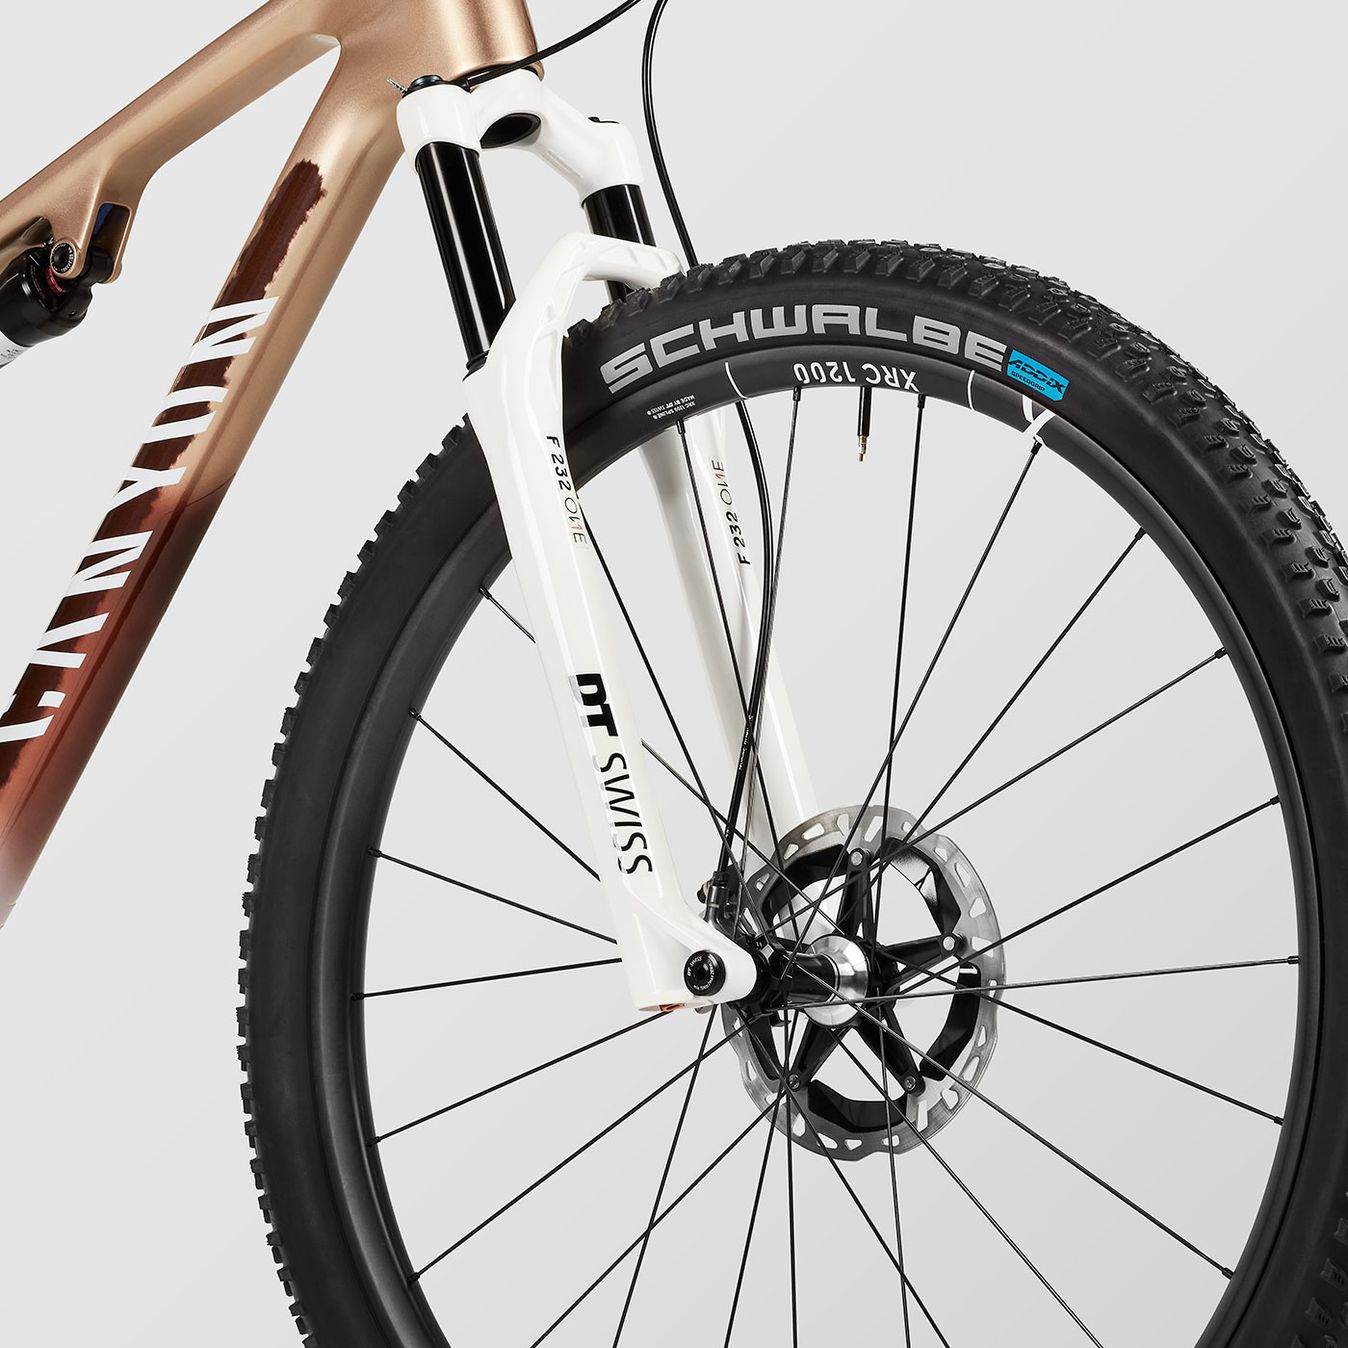 The DT Swiss F232 fork sports all white lowers that are exclusive to the Untamed